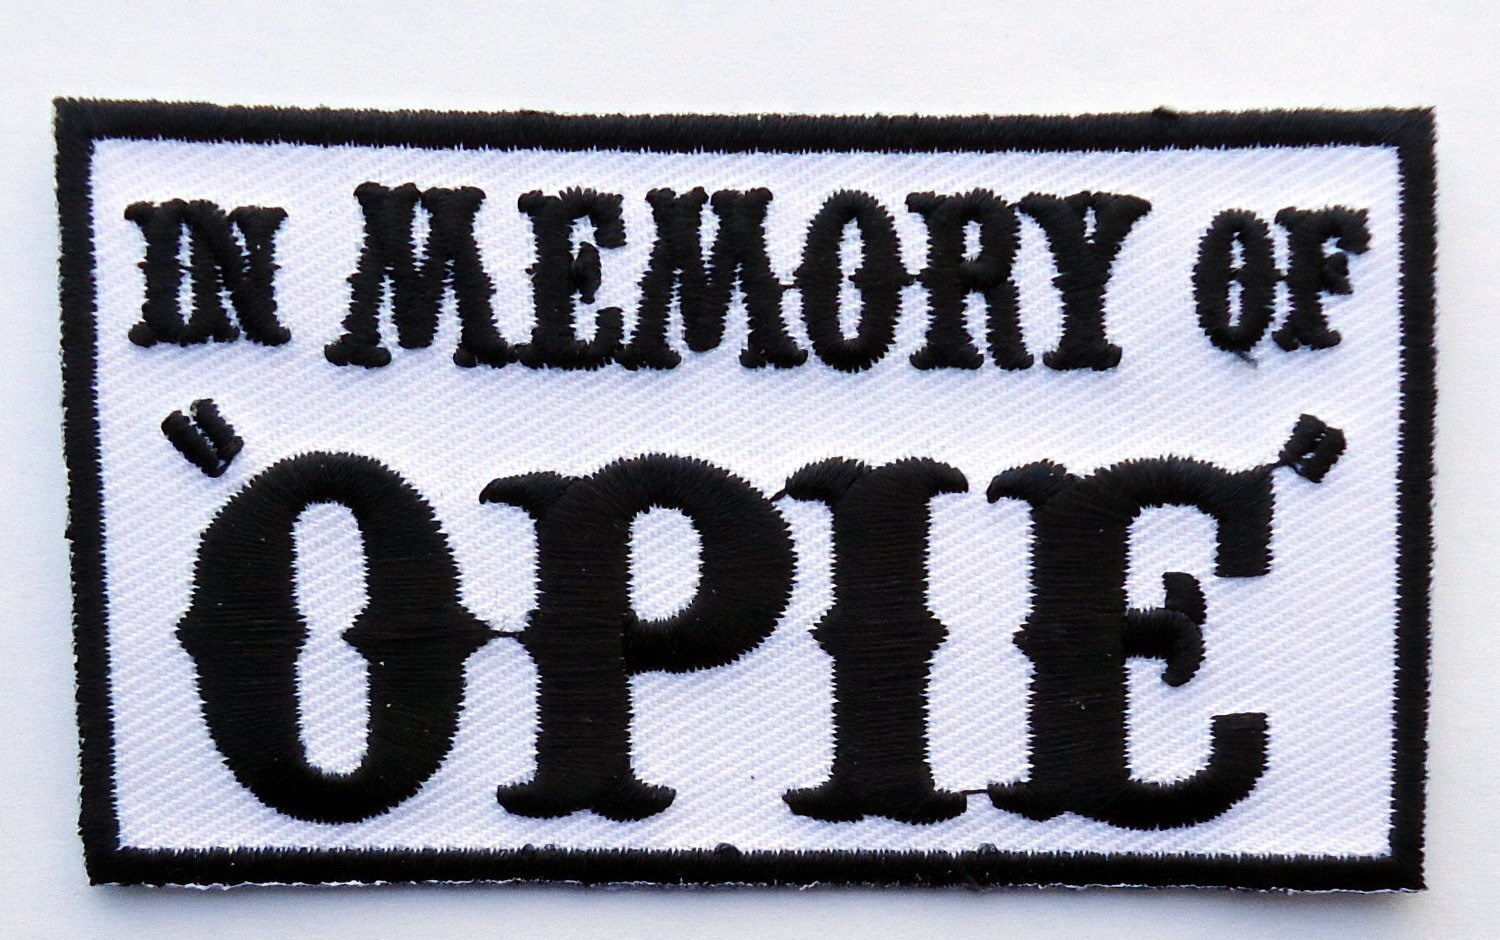 In Memory of OPIE Outlaw EMBROIDERED 3.5 inch BIKER PATCH  BLK/WHT BY MILTAC